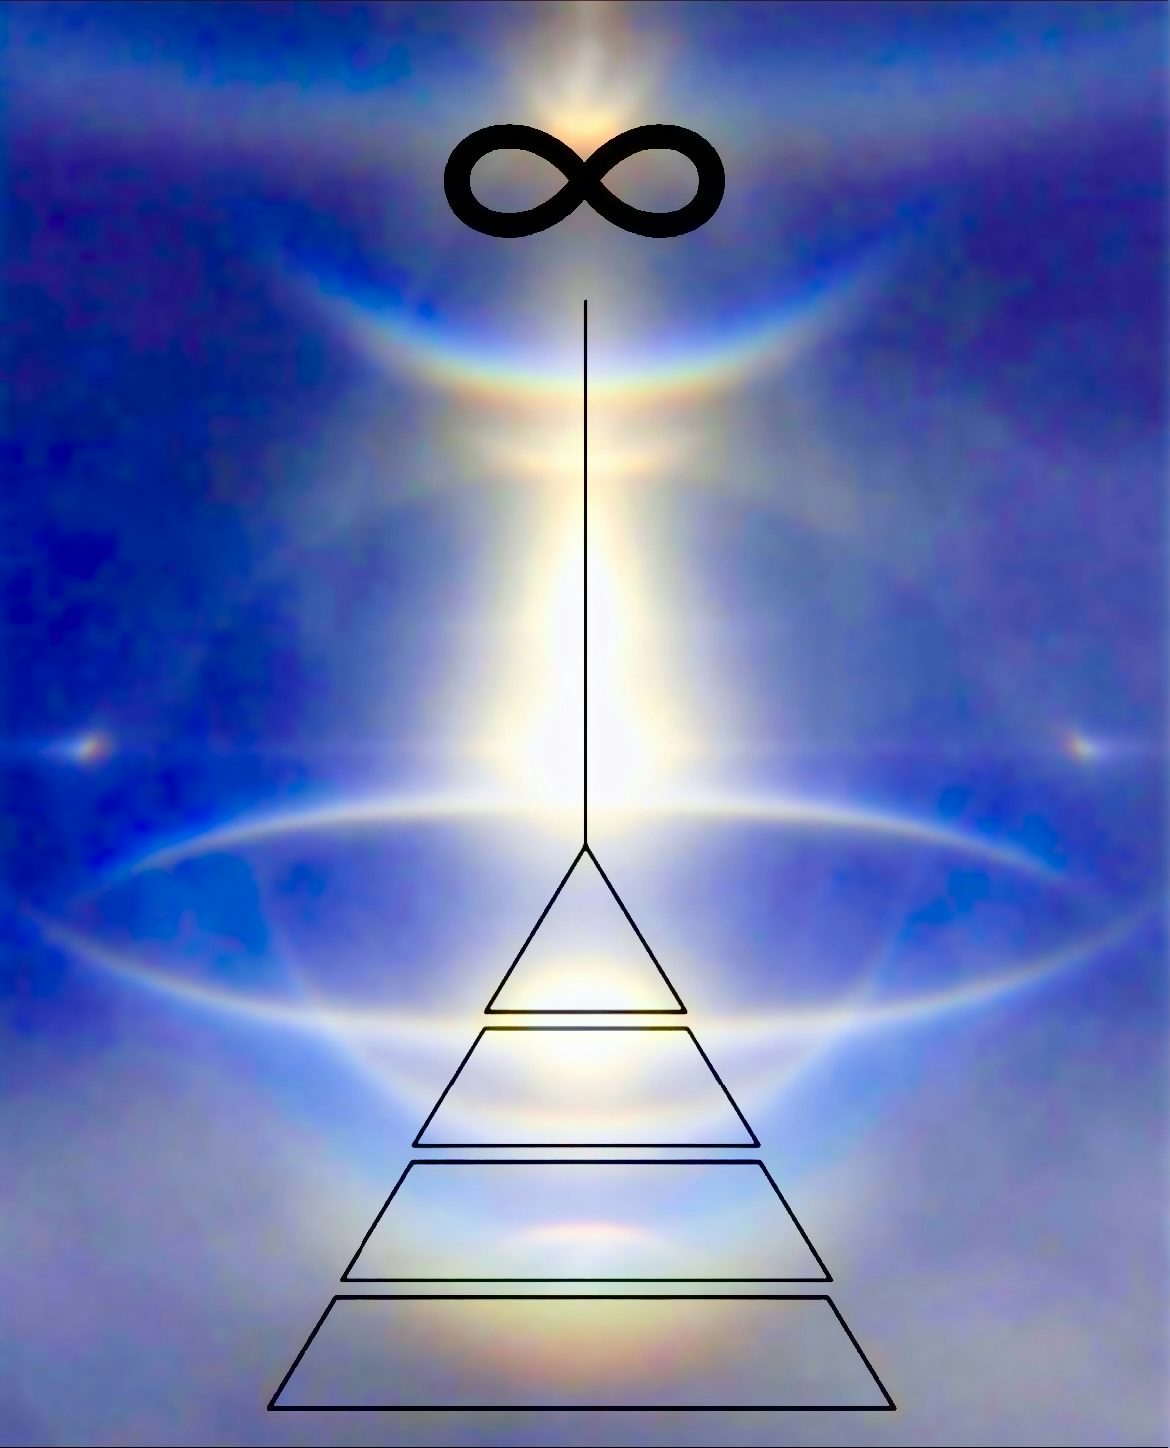 pre-perception unity/totality broken down into hierarchy of individuated elements